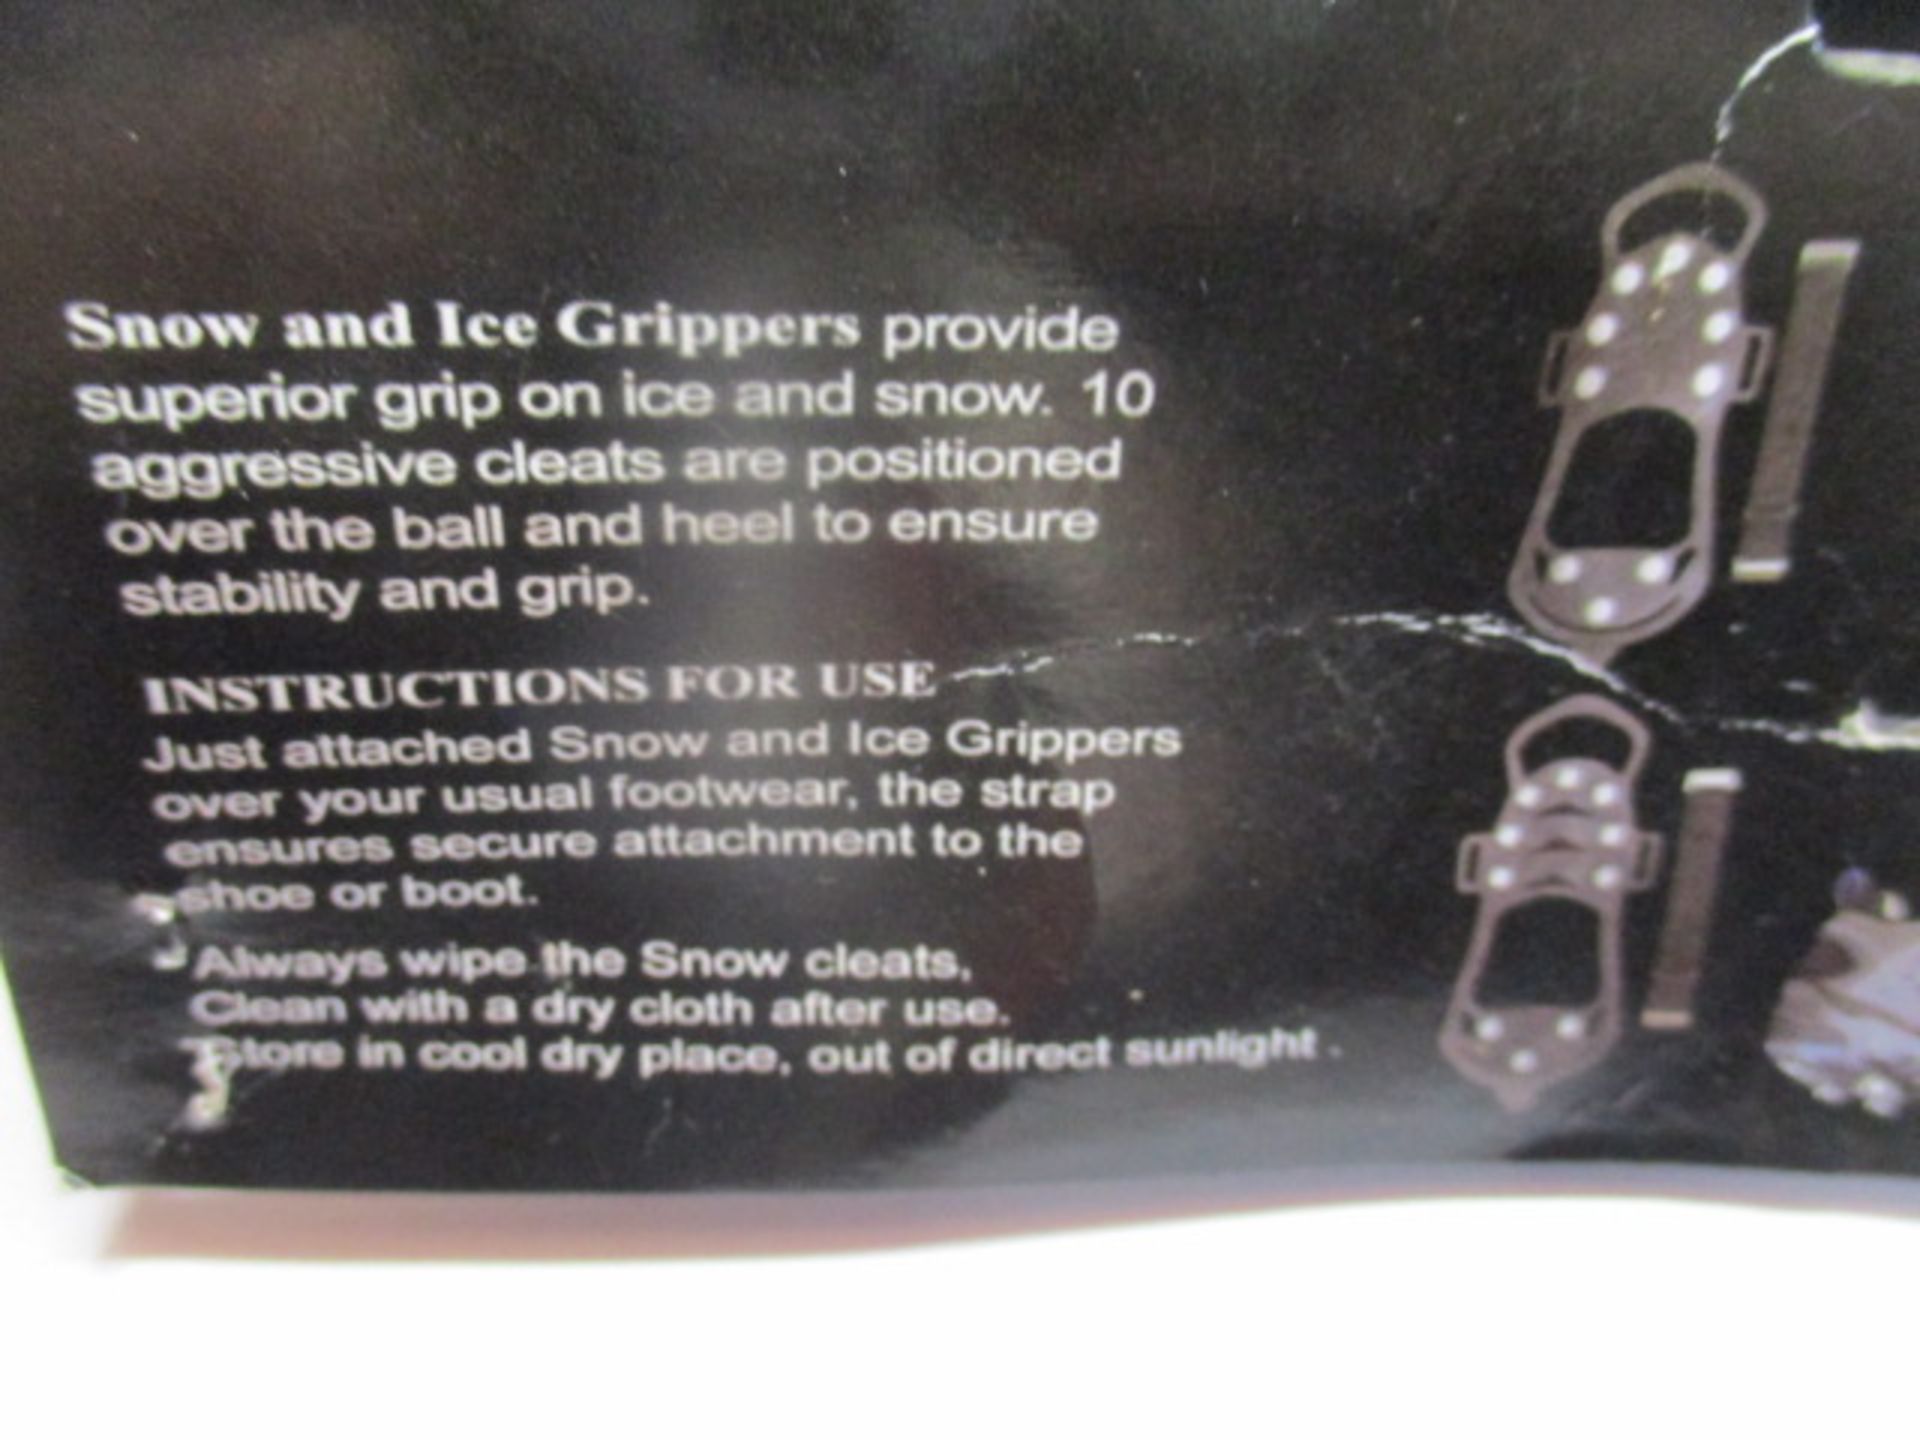 500.pcs serious traction ice grippers with stainless steel pleets, rigid construction, german made - Image 2 of 2